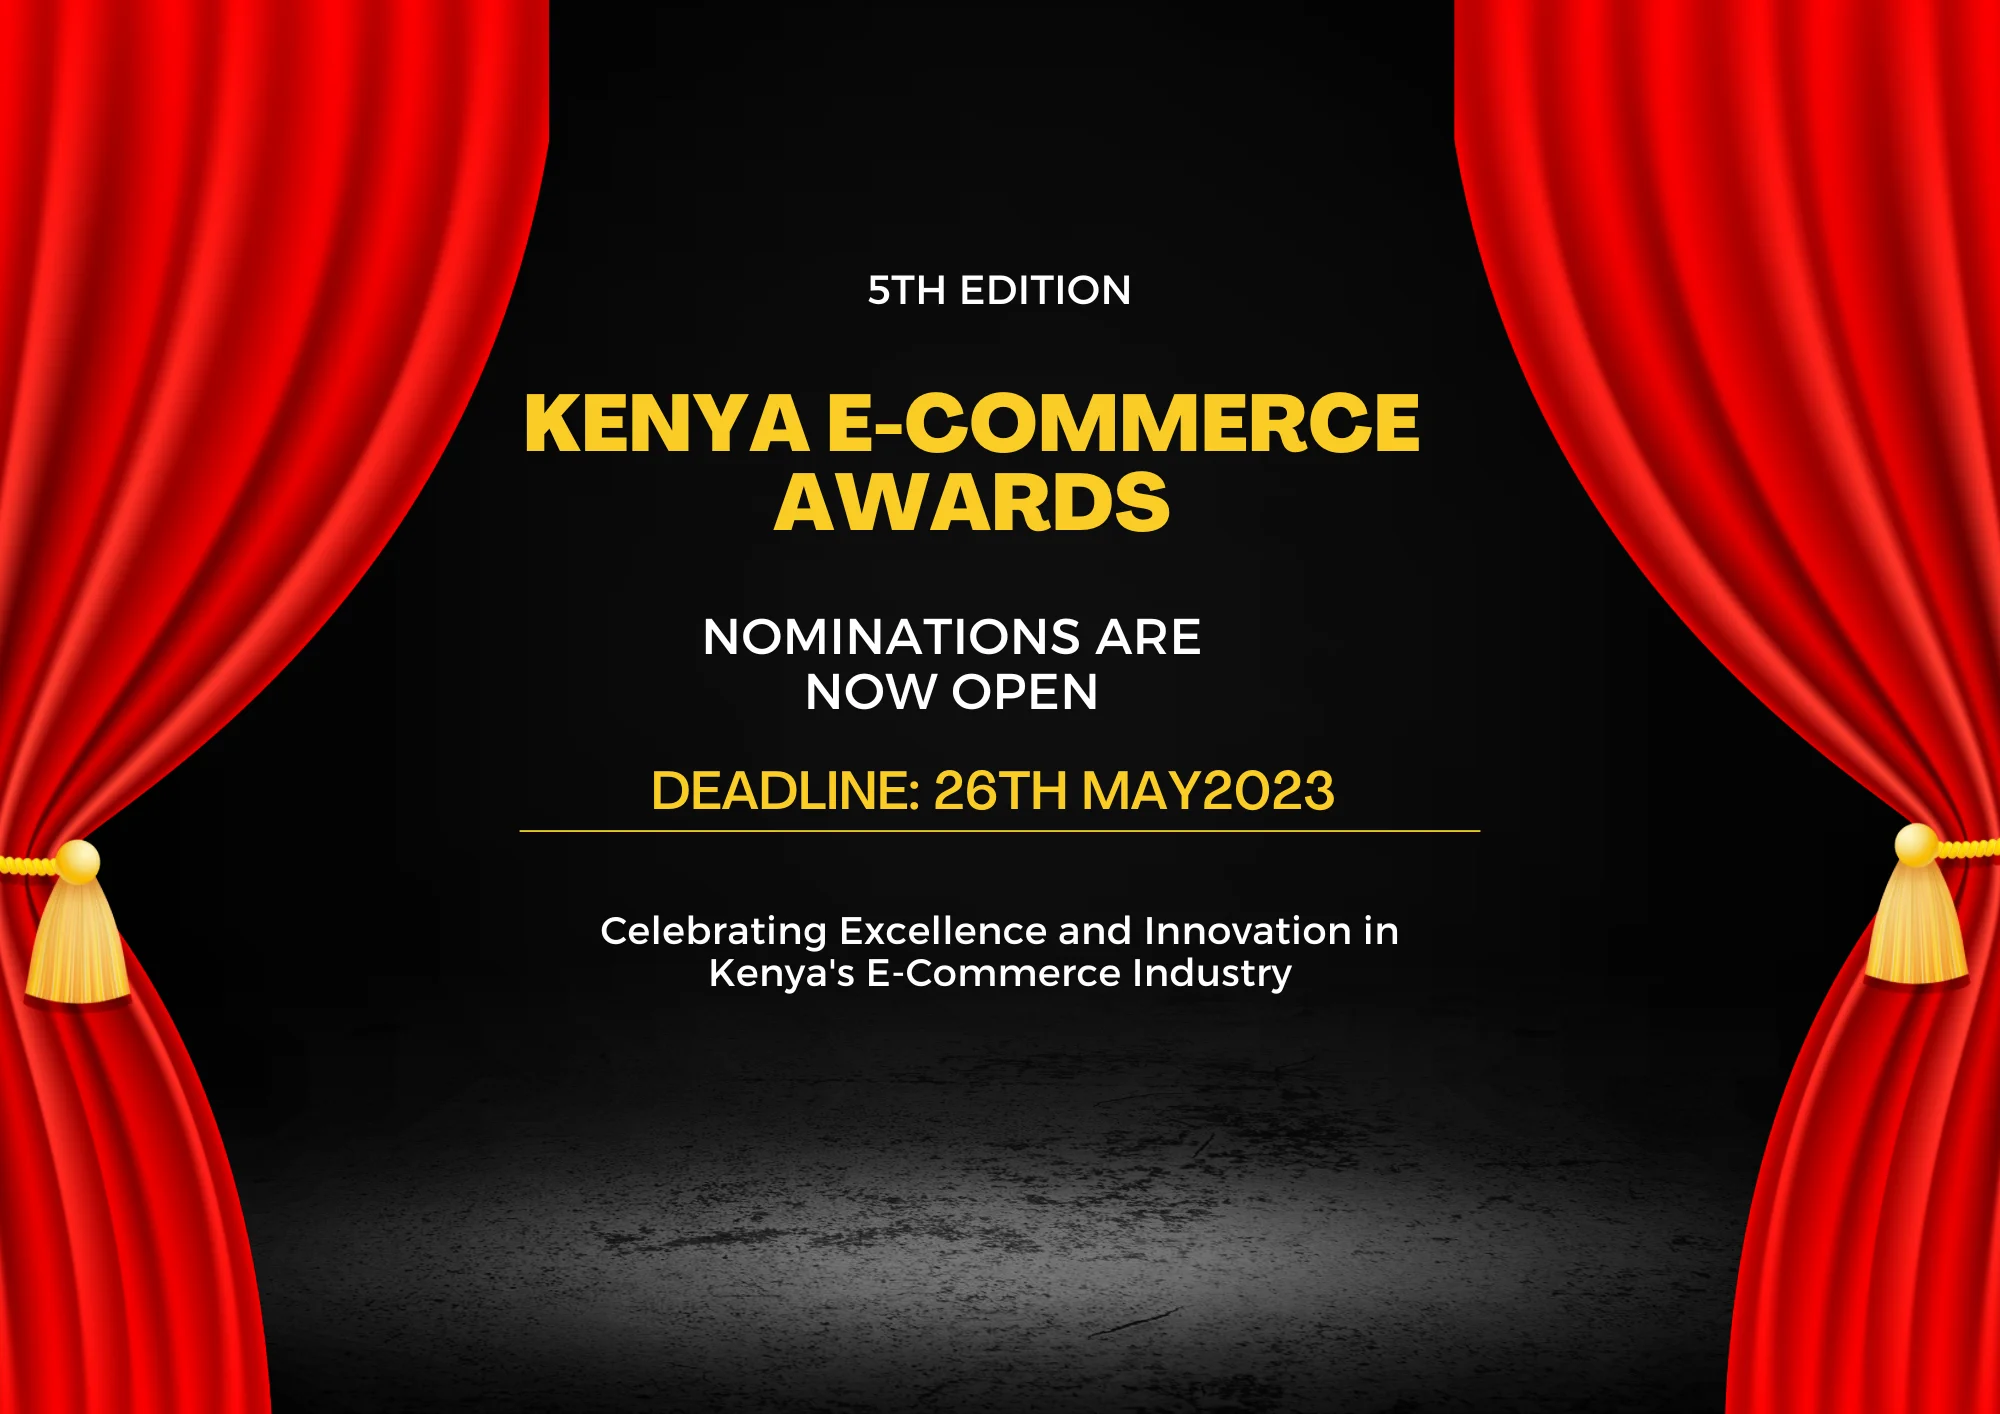 Kenya E-Commerce Awards Opens Nominations for the 5th Edition